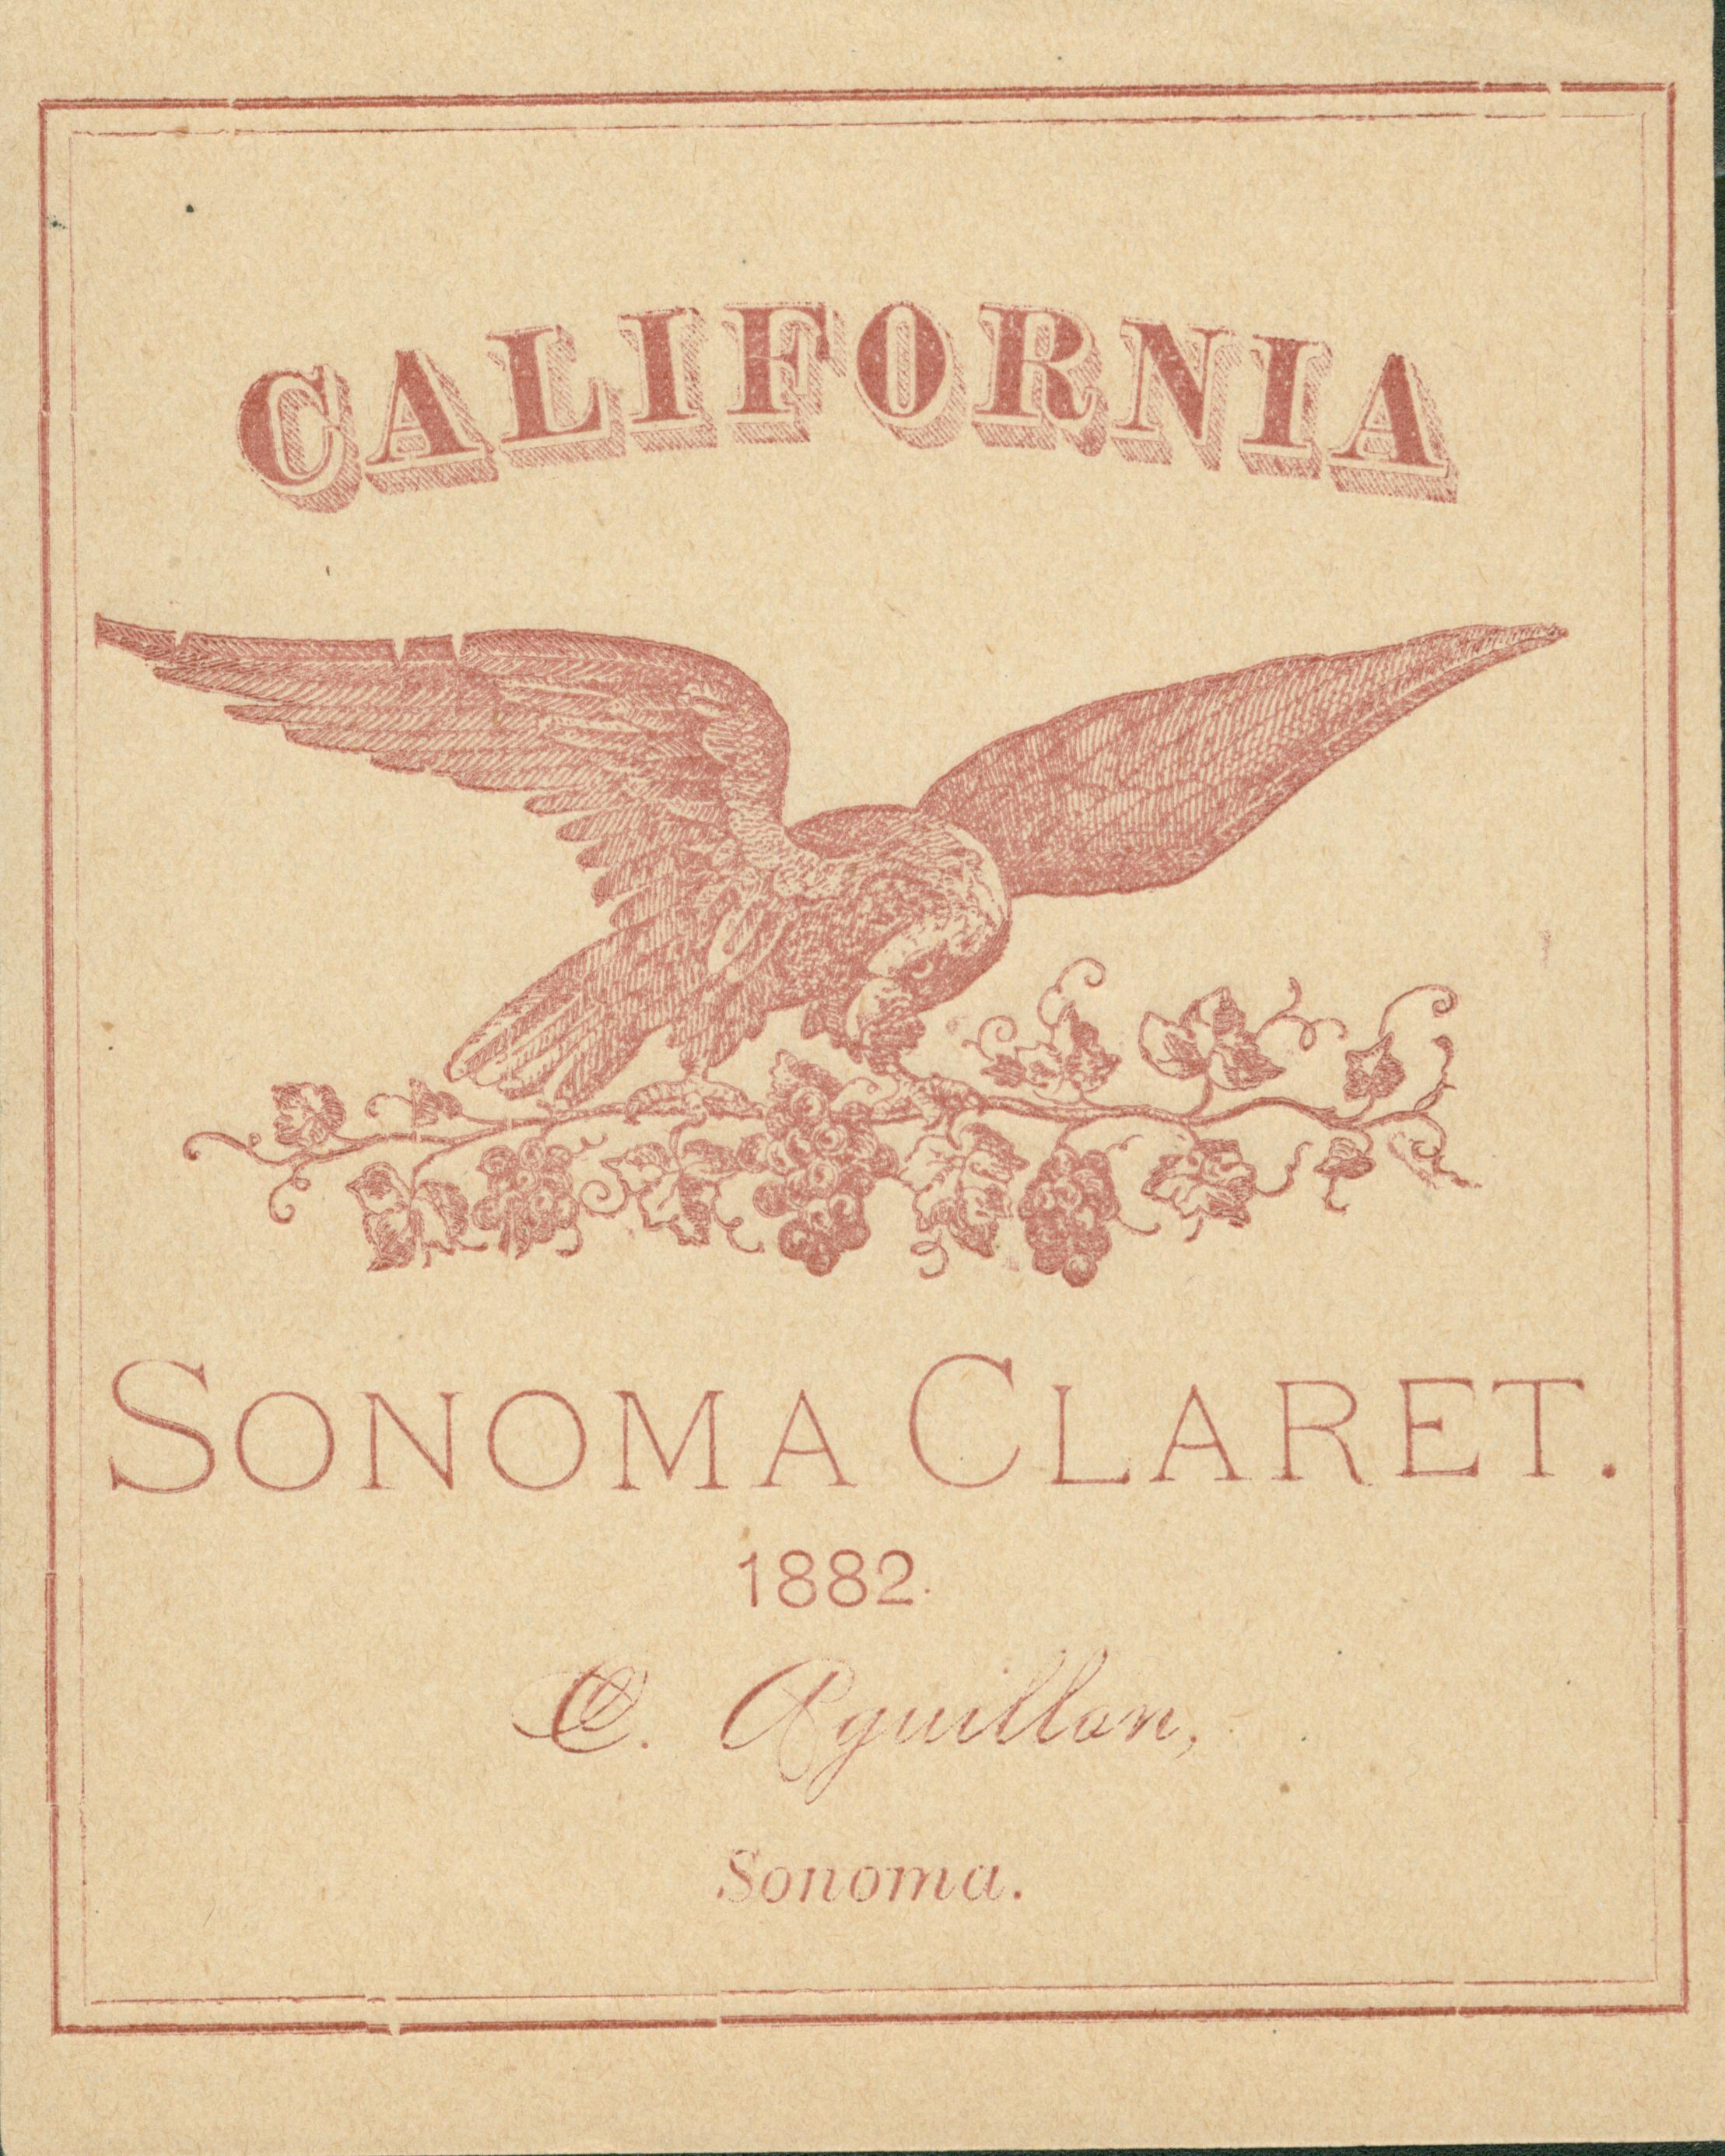 This wine label shows an eagle perched on a grapevine bough